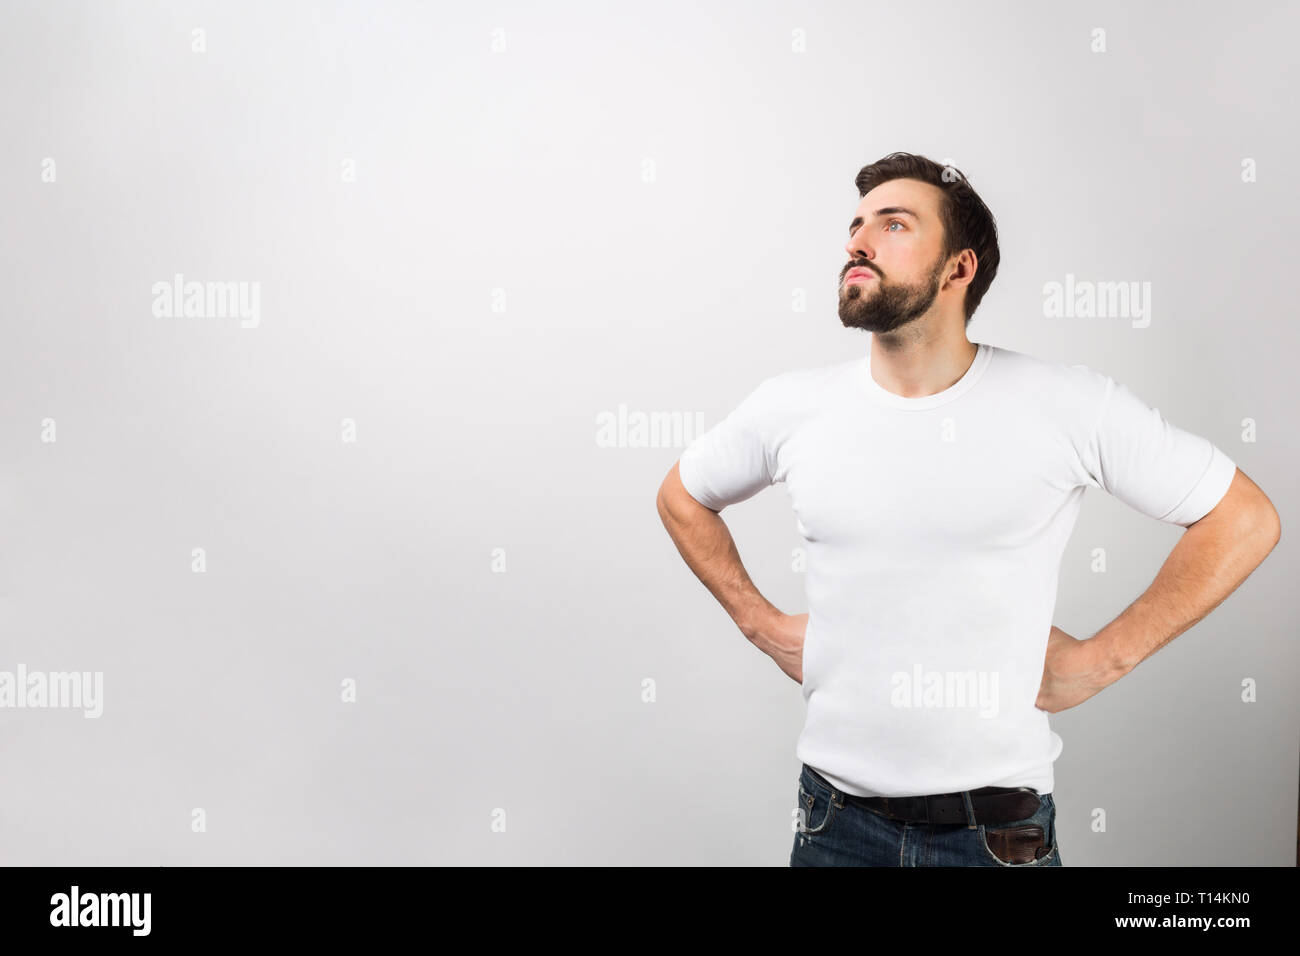 This man is standing in a position of a hero putting his hands on his hips. He is dreaming about better times or the future. That guy looks very serio Stock Photo